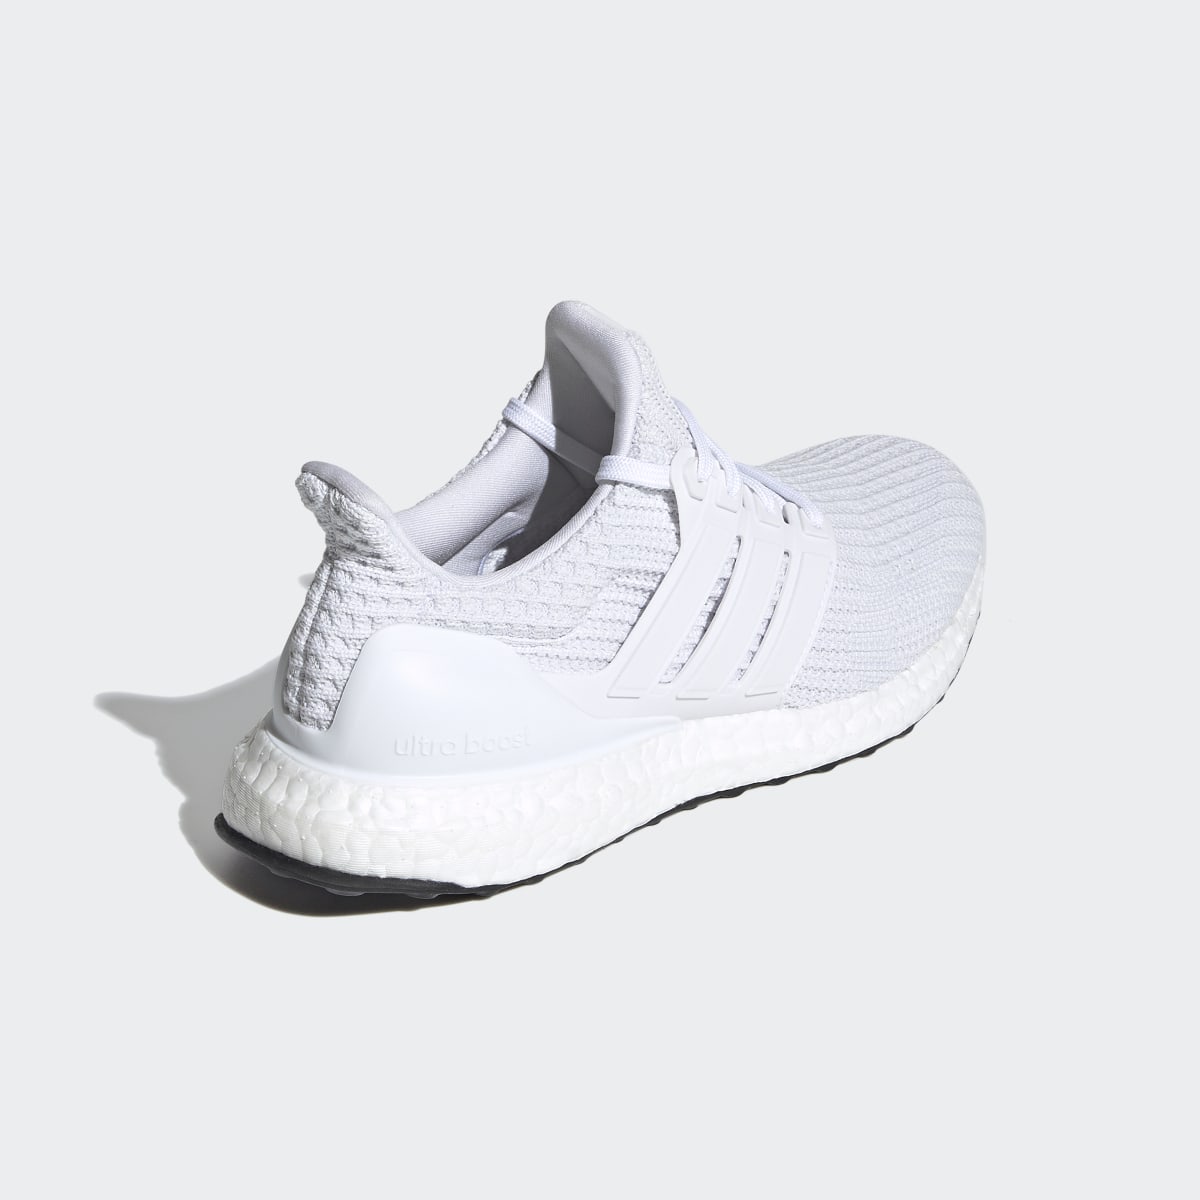 Adidas Ultraboost 4.0 DNA Shoes. 7